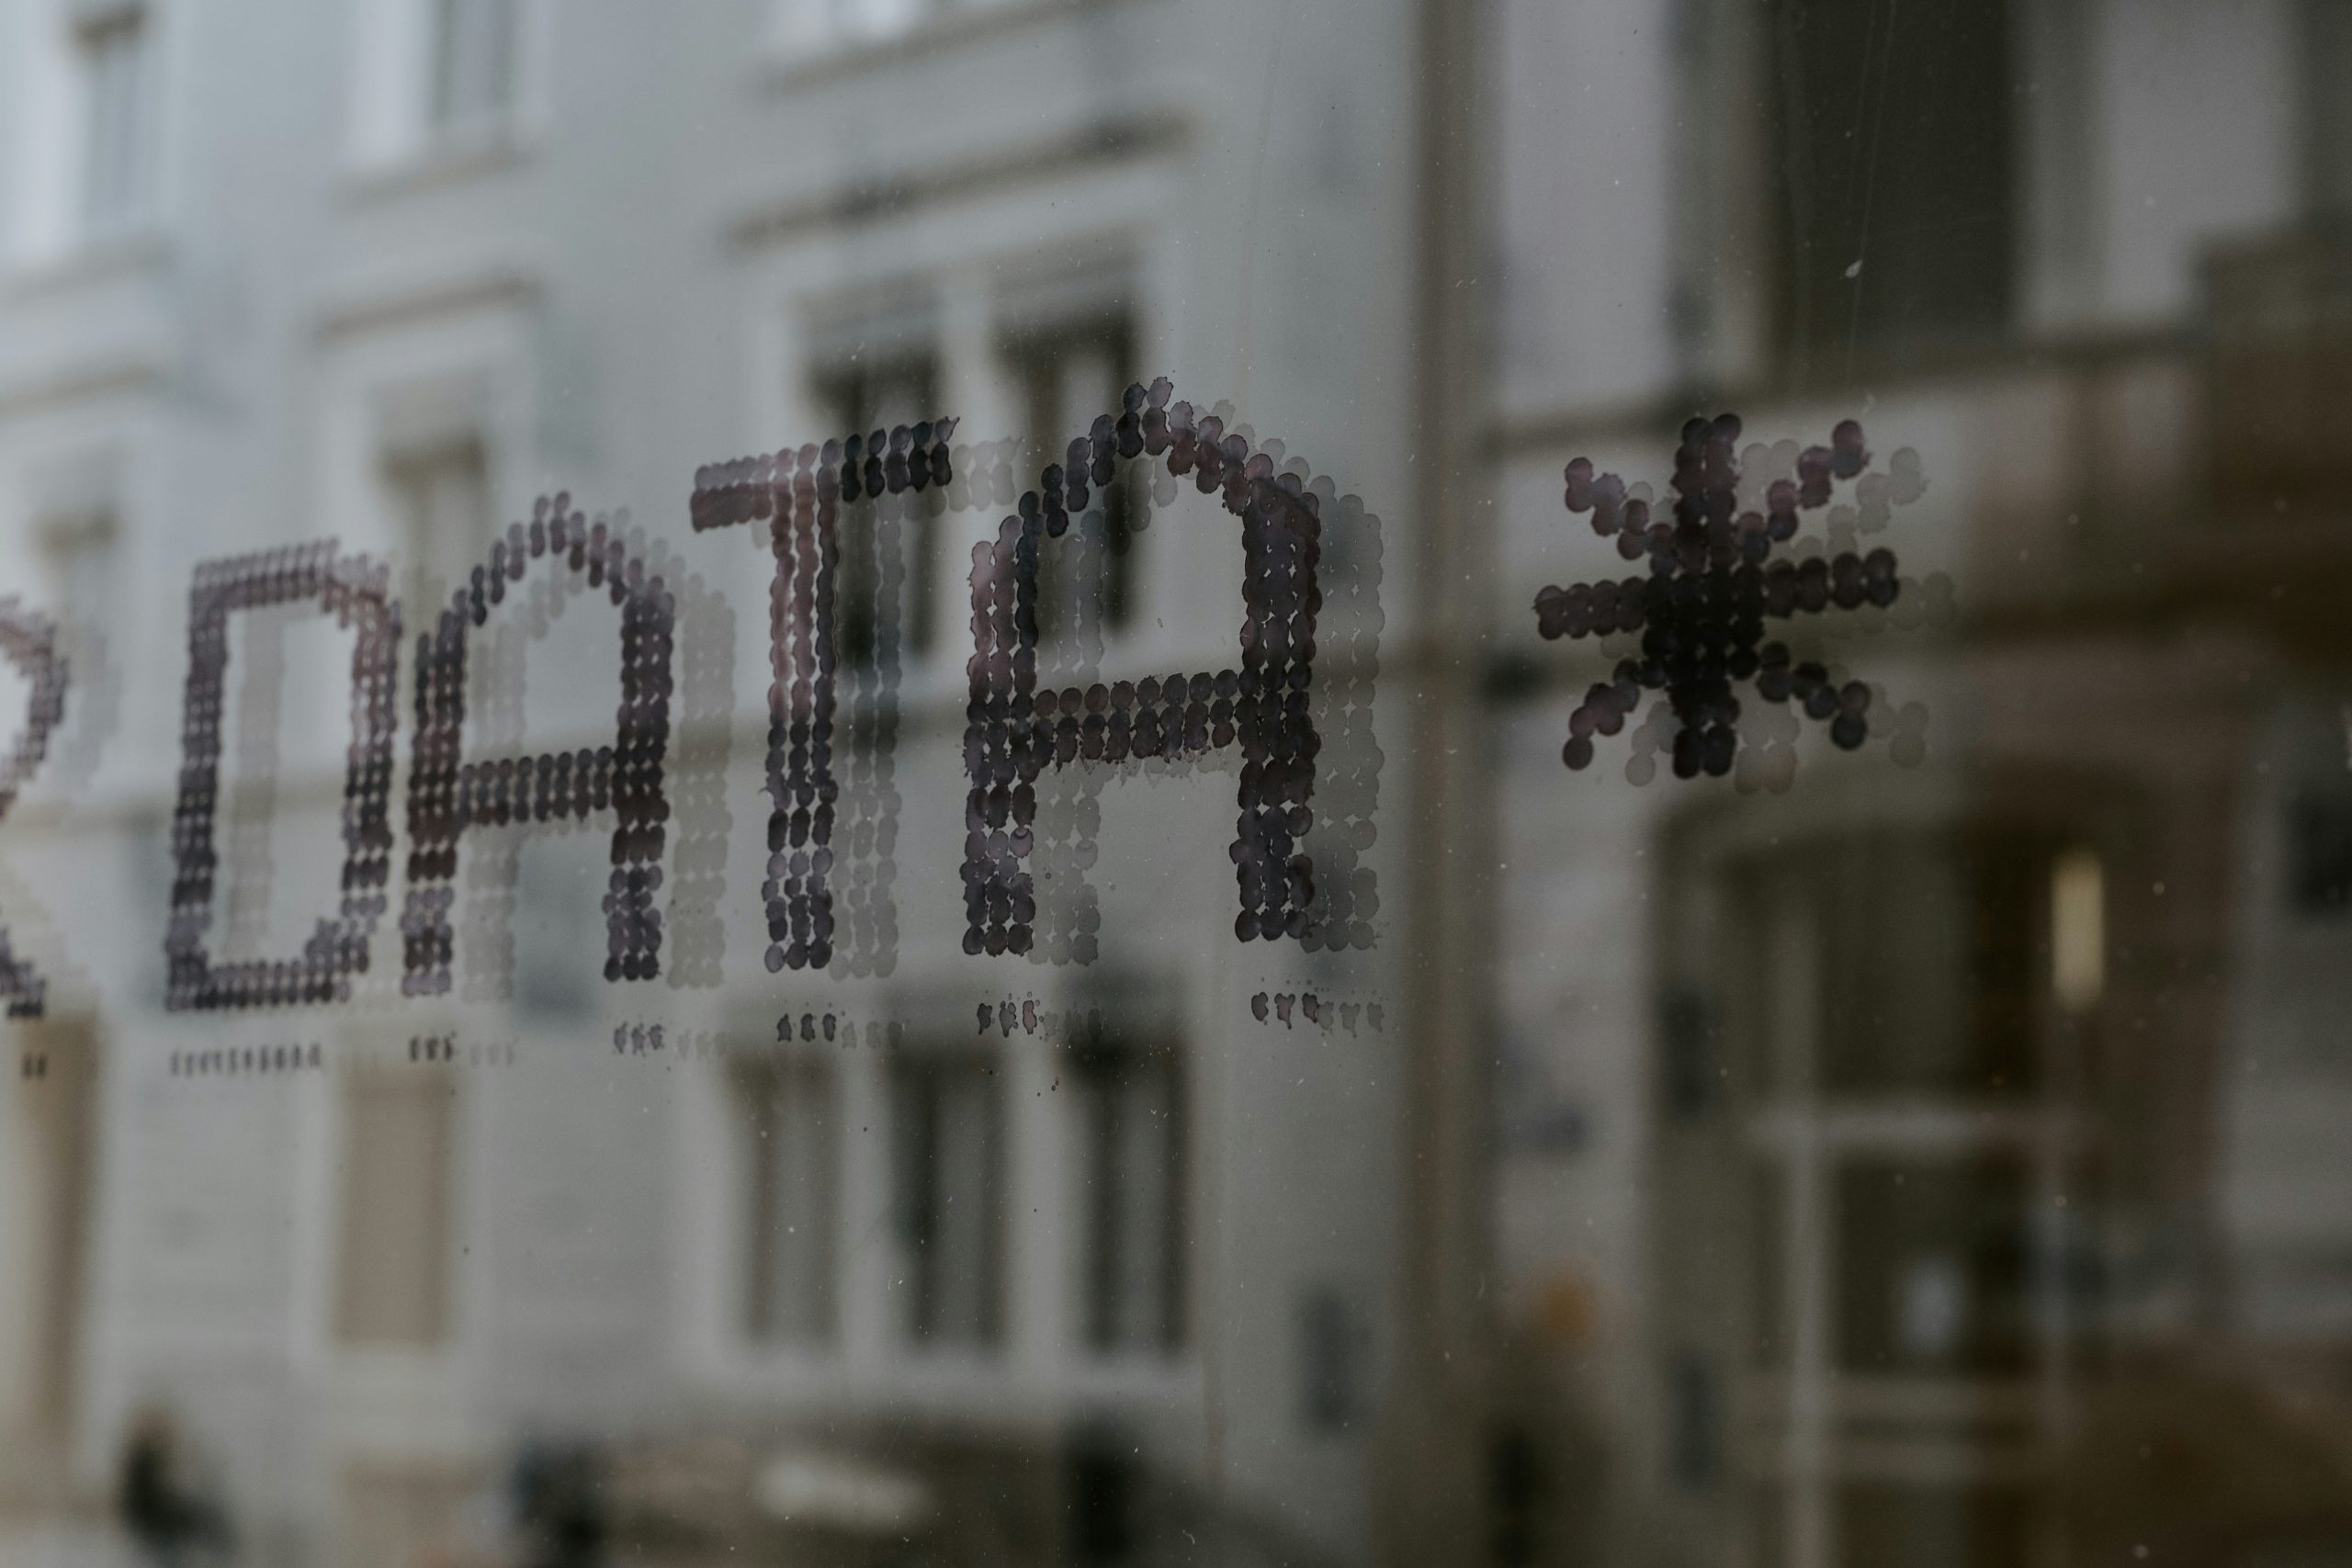 The term 'DATA' spelled out with dot stickers on a glass window, against a blurred cityscape background, illustrating the concept of data collection through web scraping.